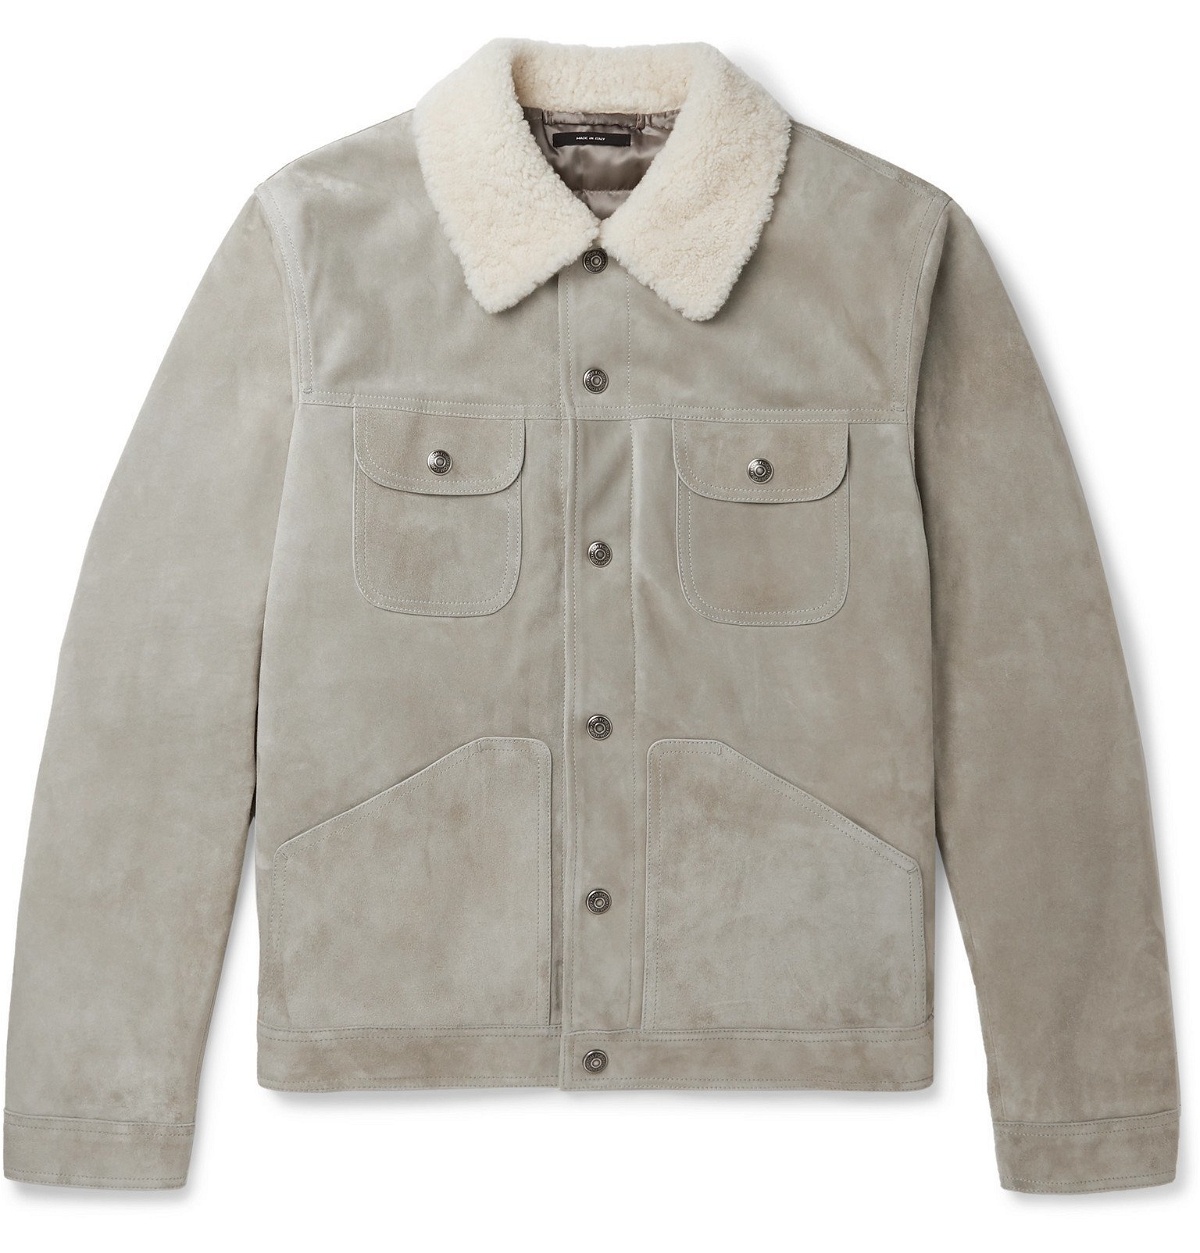 TOM FORD - Shearling-Trimmed Suede Jacket - Gray TOM FORD